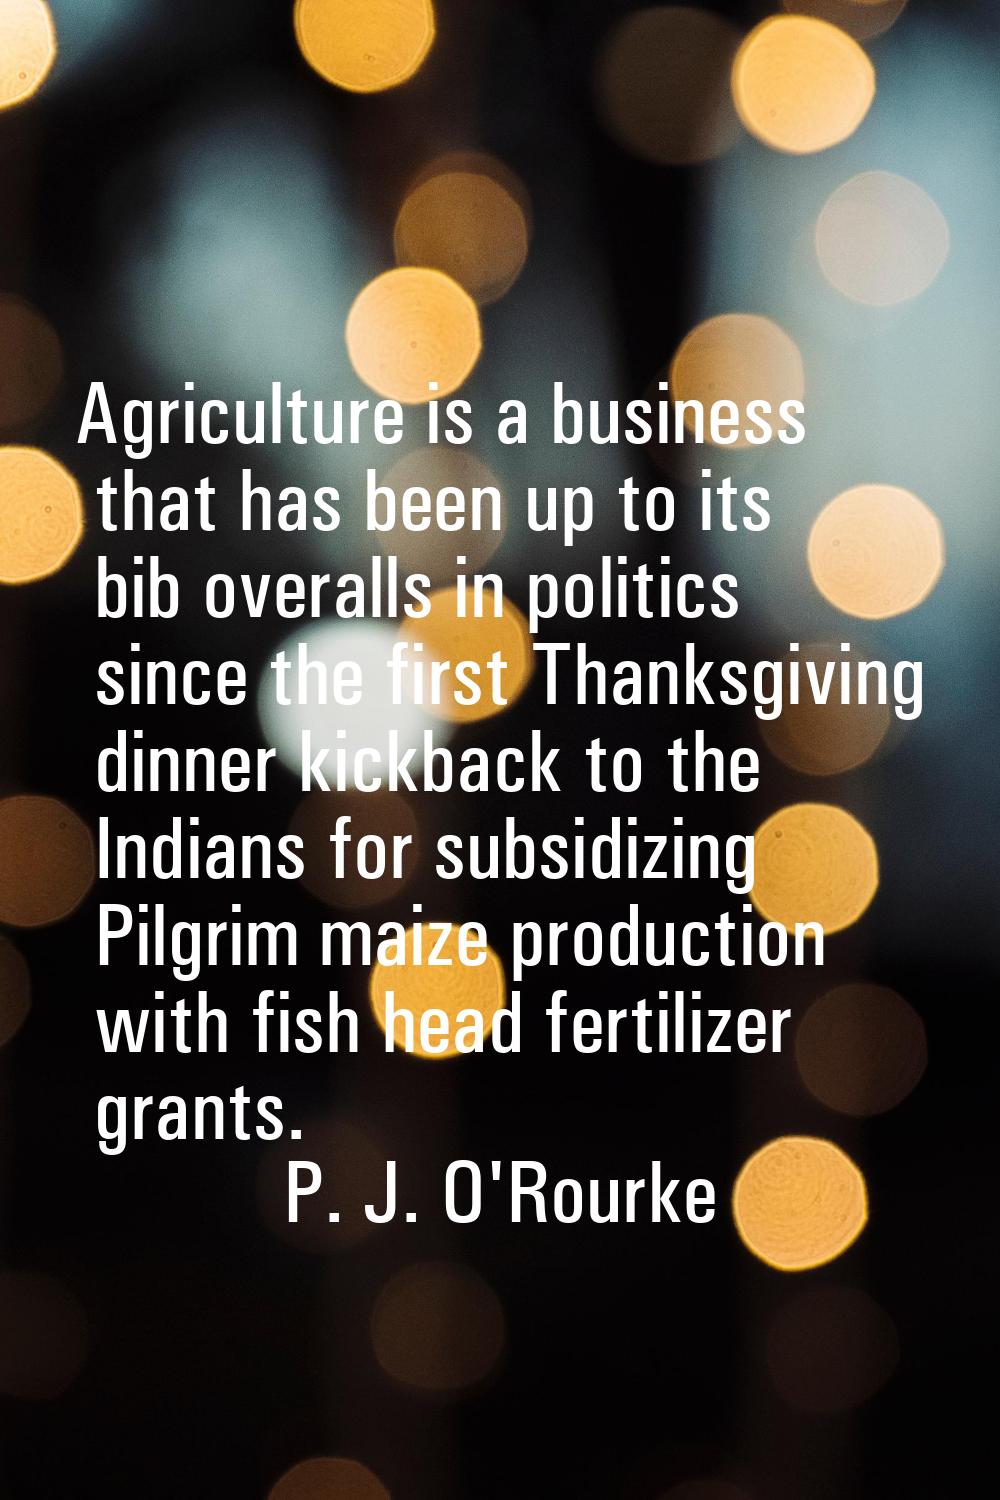 Agriculture is a business that has been up to its bib overalls in politics since the first Thanksgi